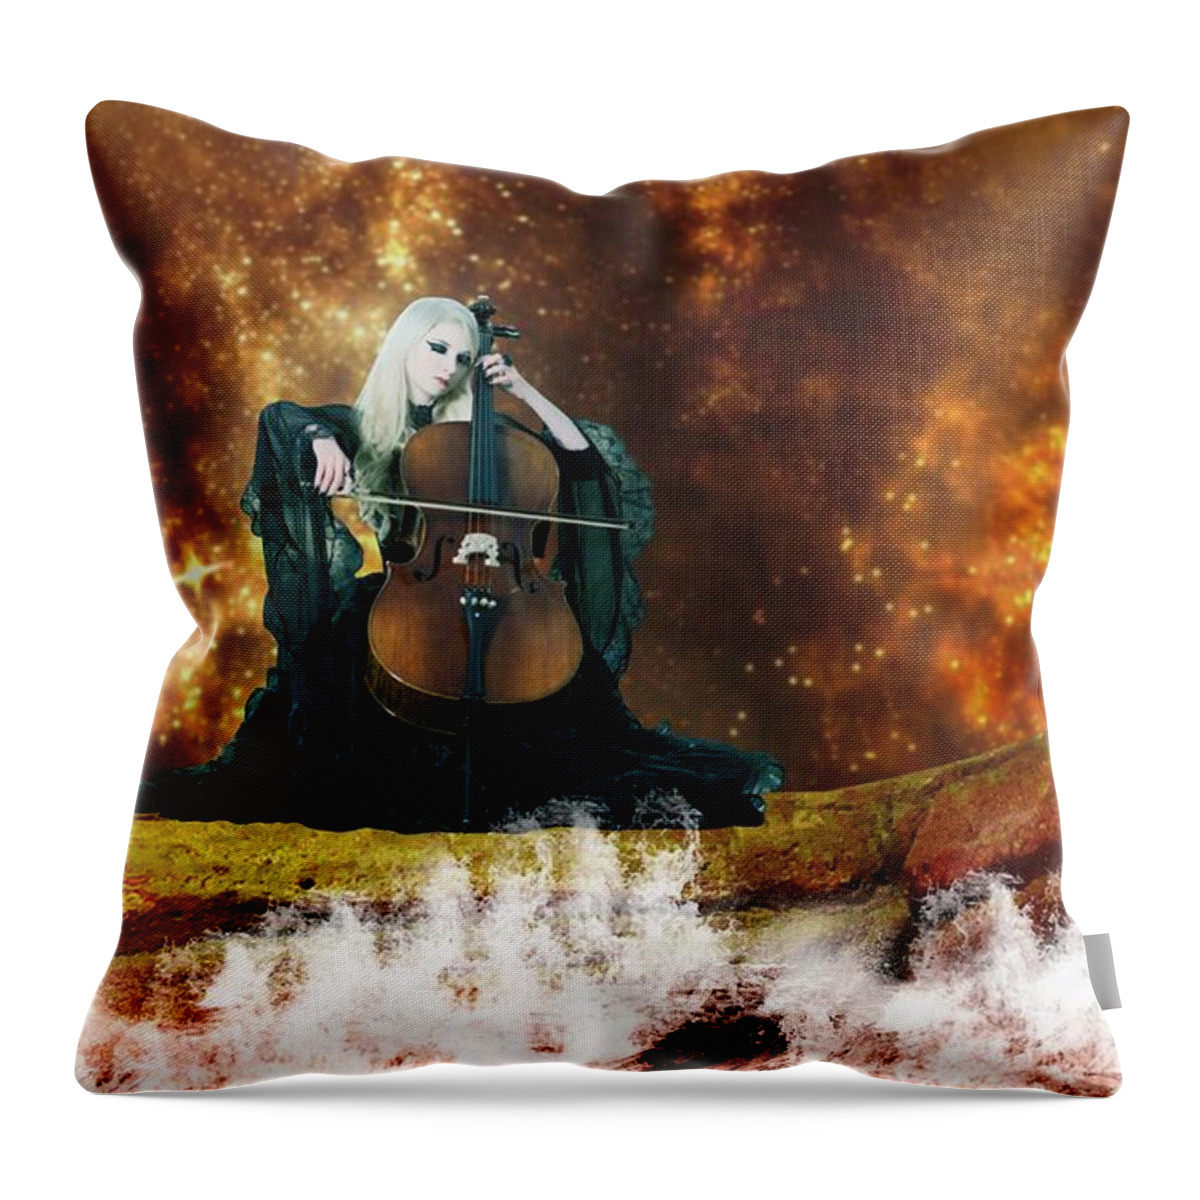 Manipulation Throw Pillow featuring the digital art Ode Of Solitude by Ester McGuire